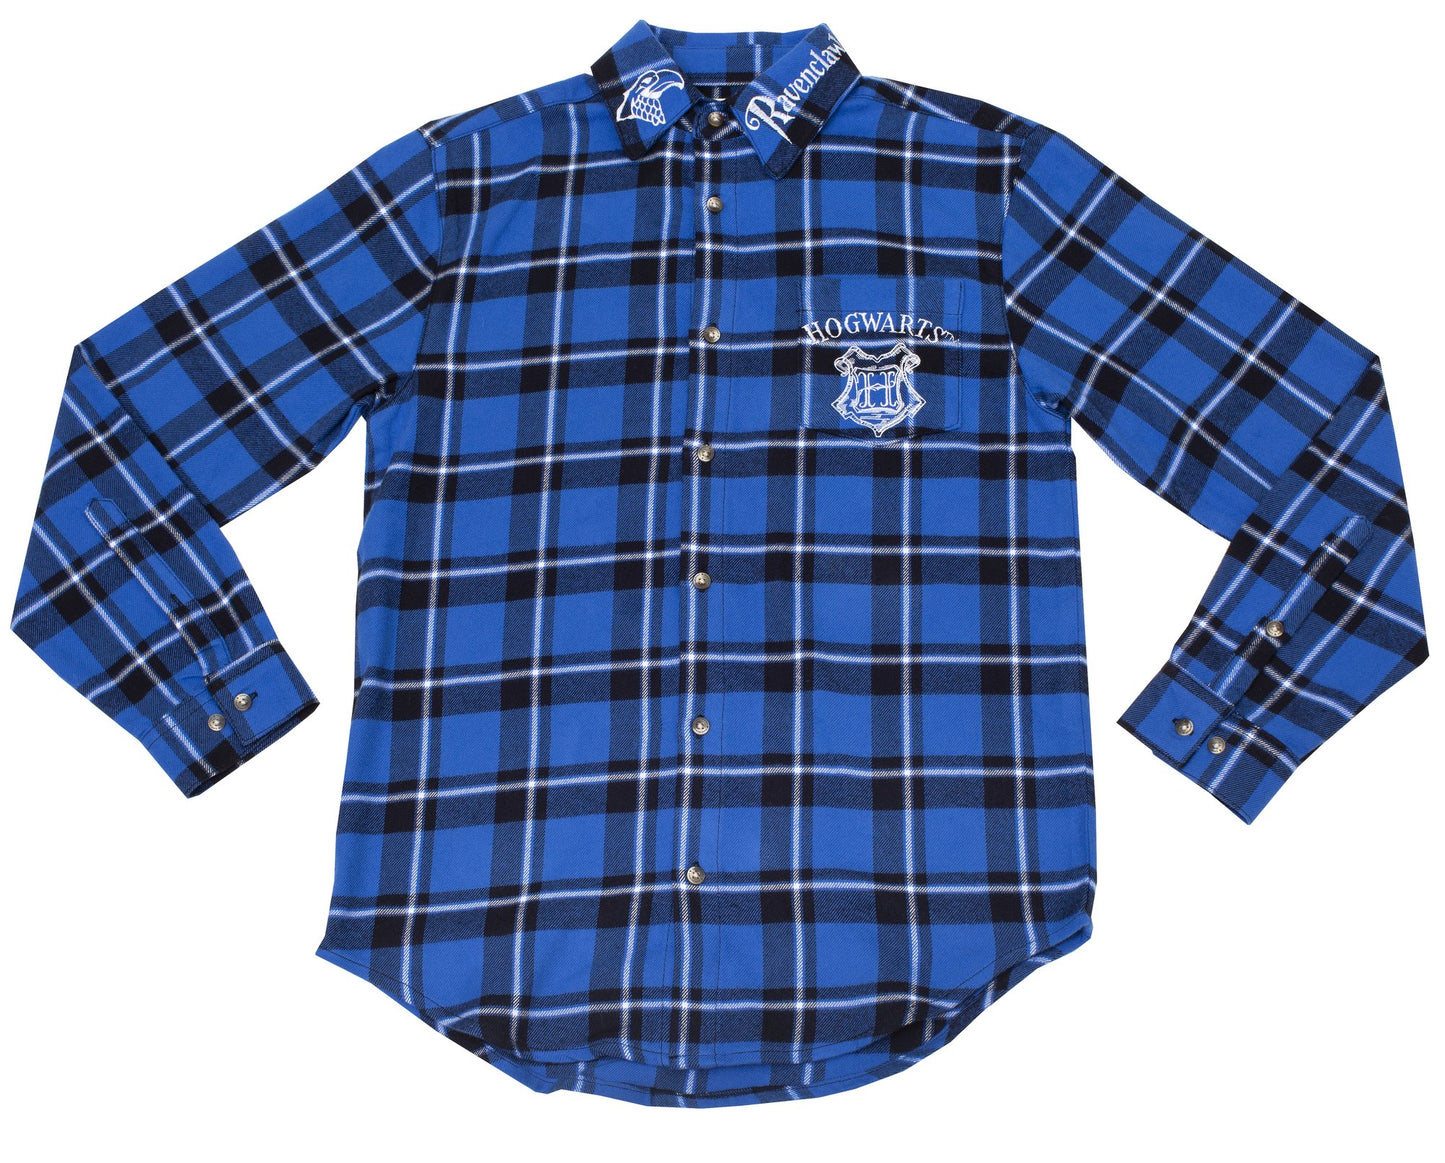 Ravenclaw House Crest (Harry Potter) Flannel Shirt by Cakeworthy